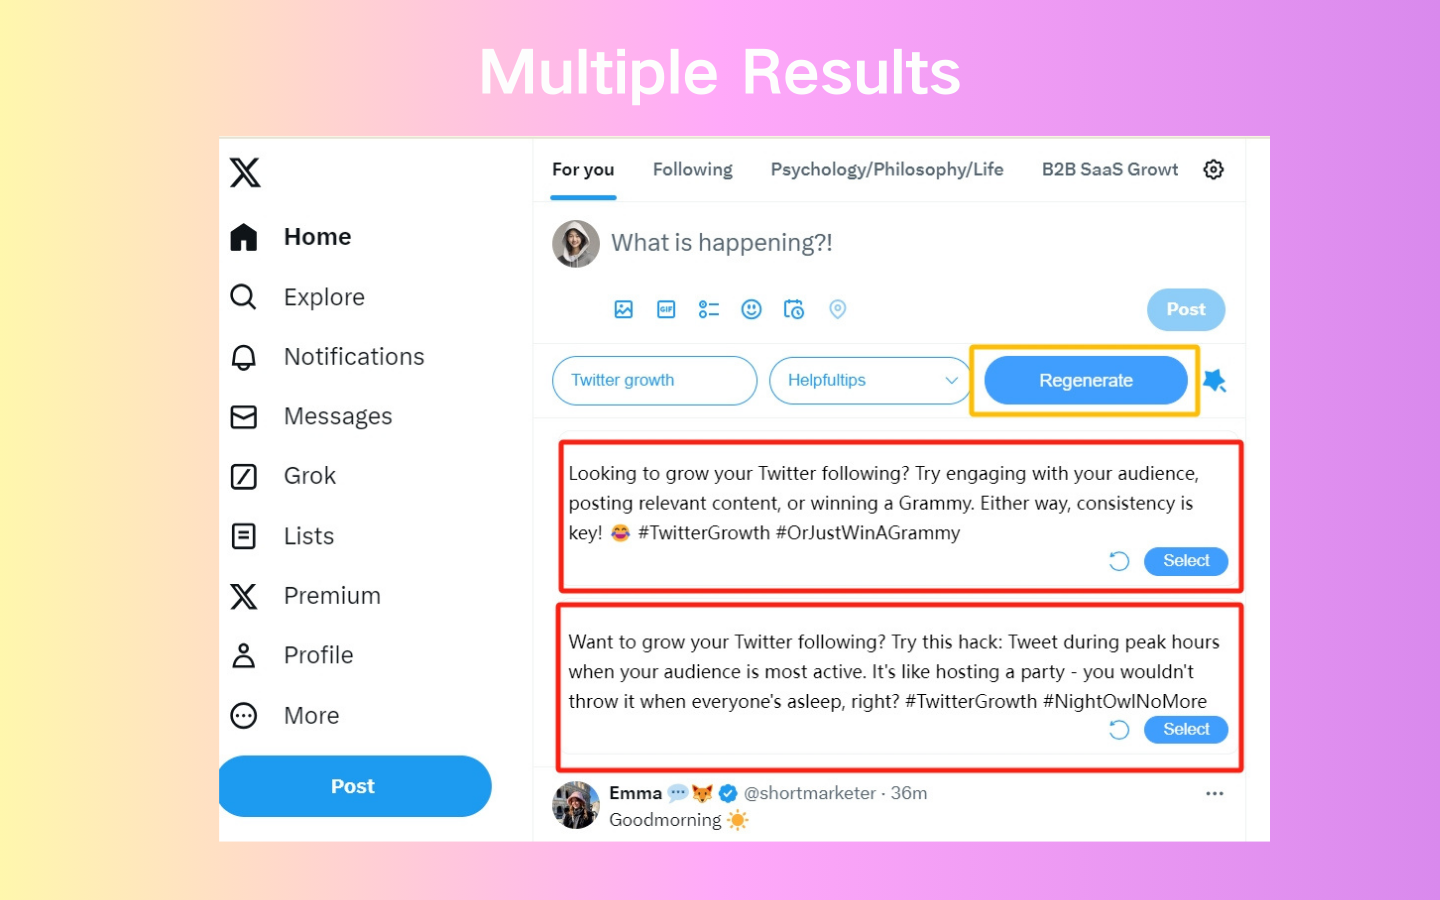 AI Twitter Generator can generate multiple results